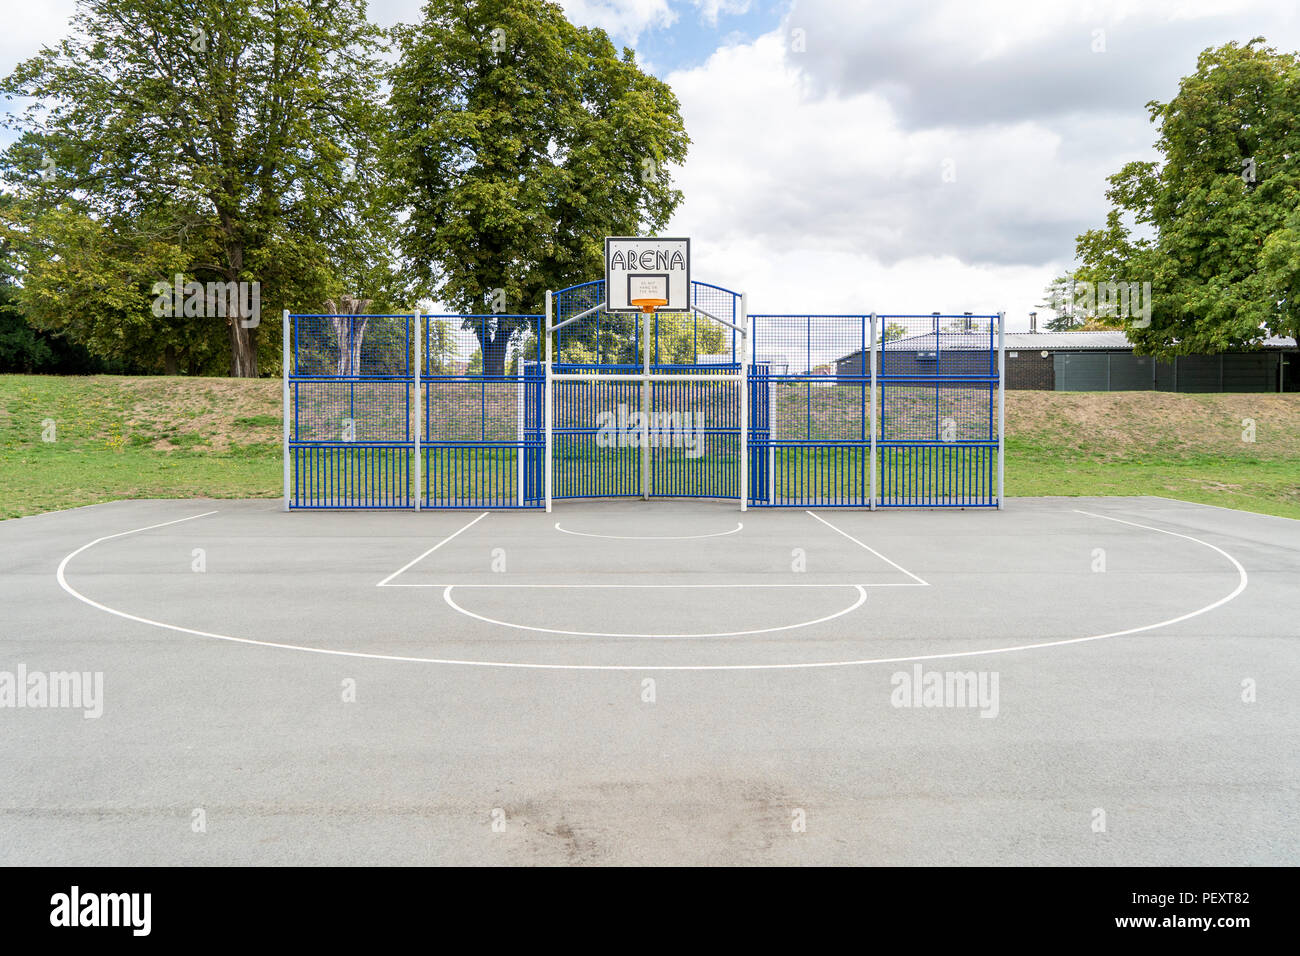 Basketball Practice Court With White Line Markings Stock Photo Alamy